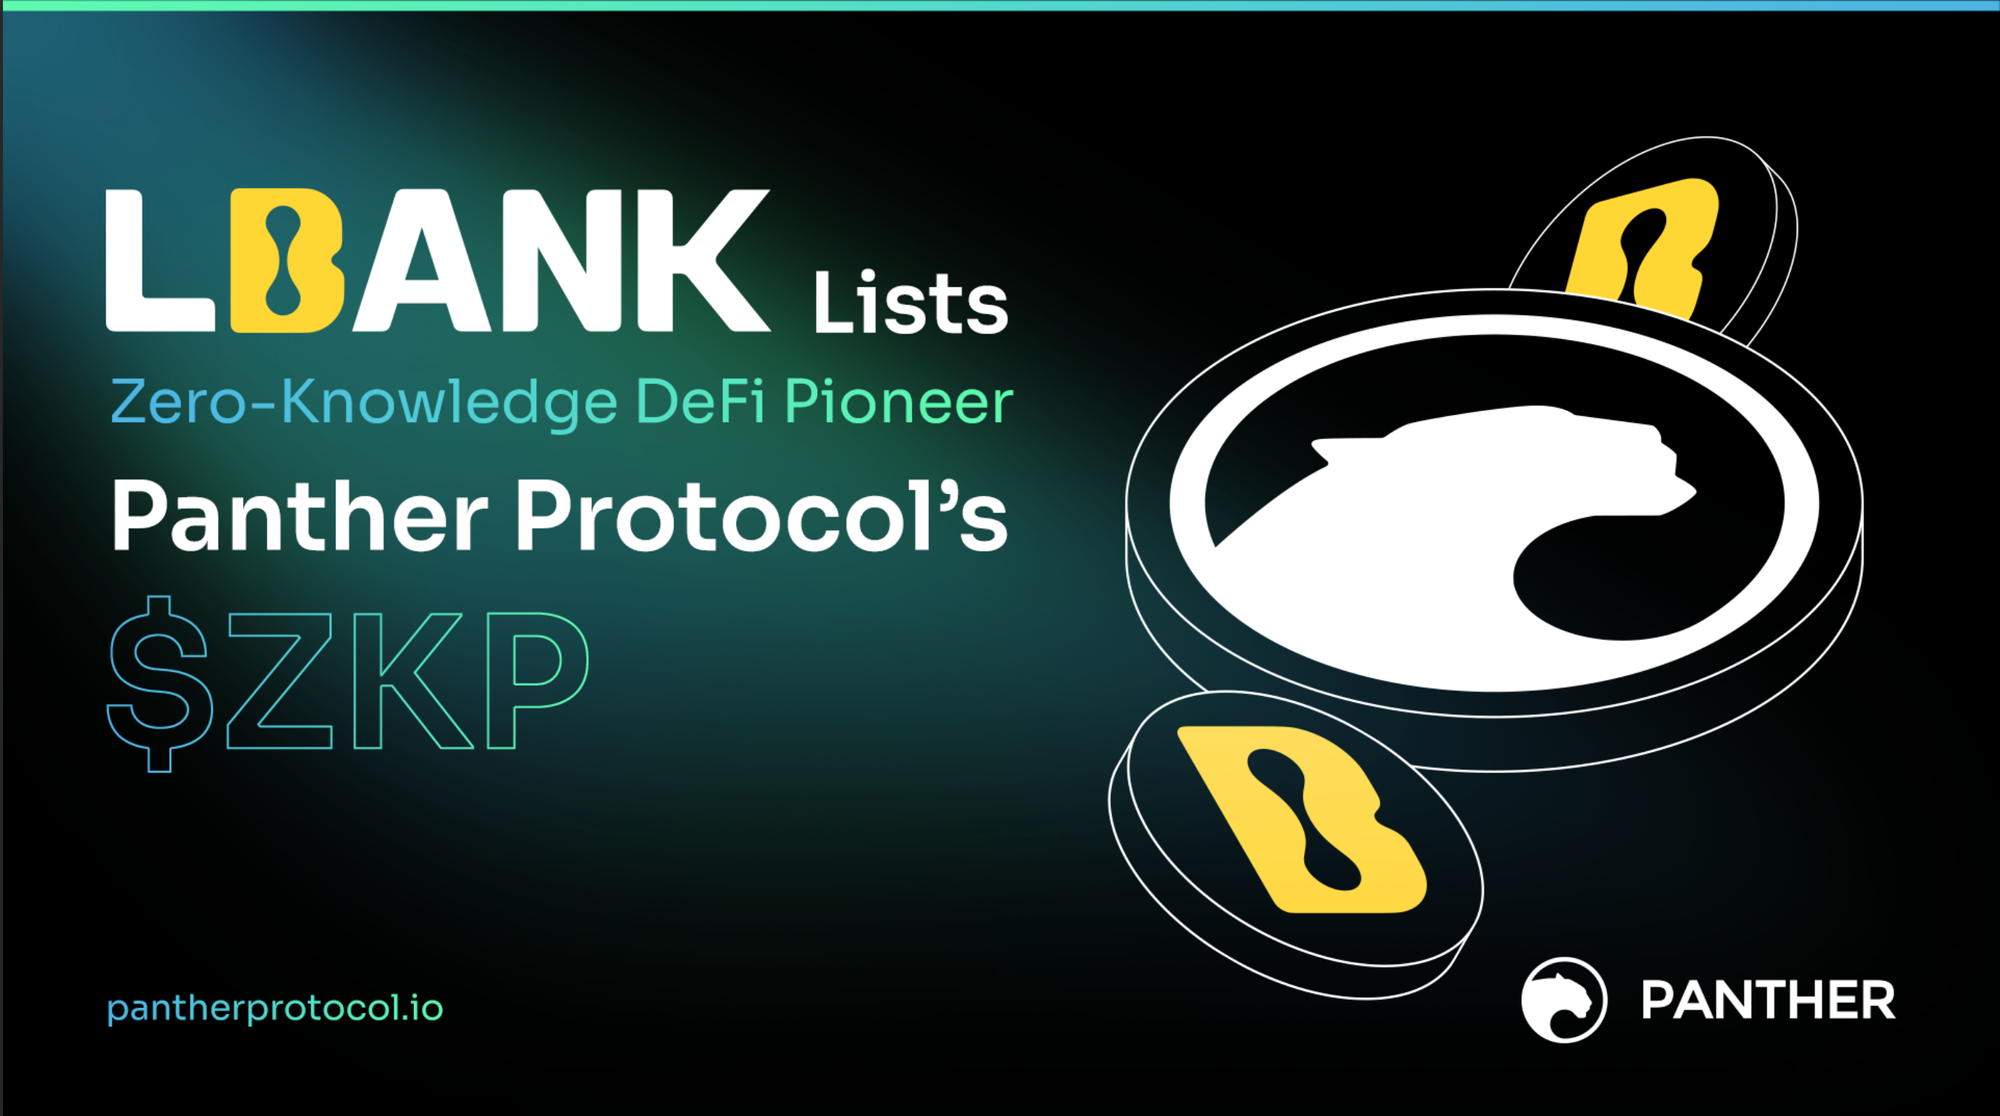 LBank Lists Zero-Knowledge DeFi Pioneer Panther Protocol’s $ZKP